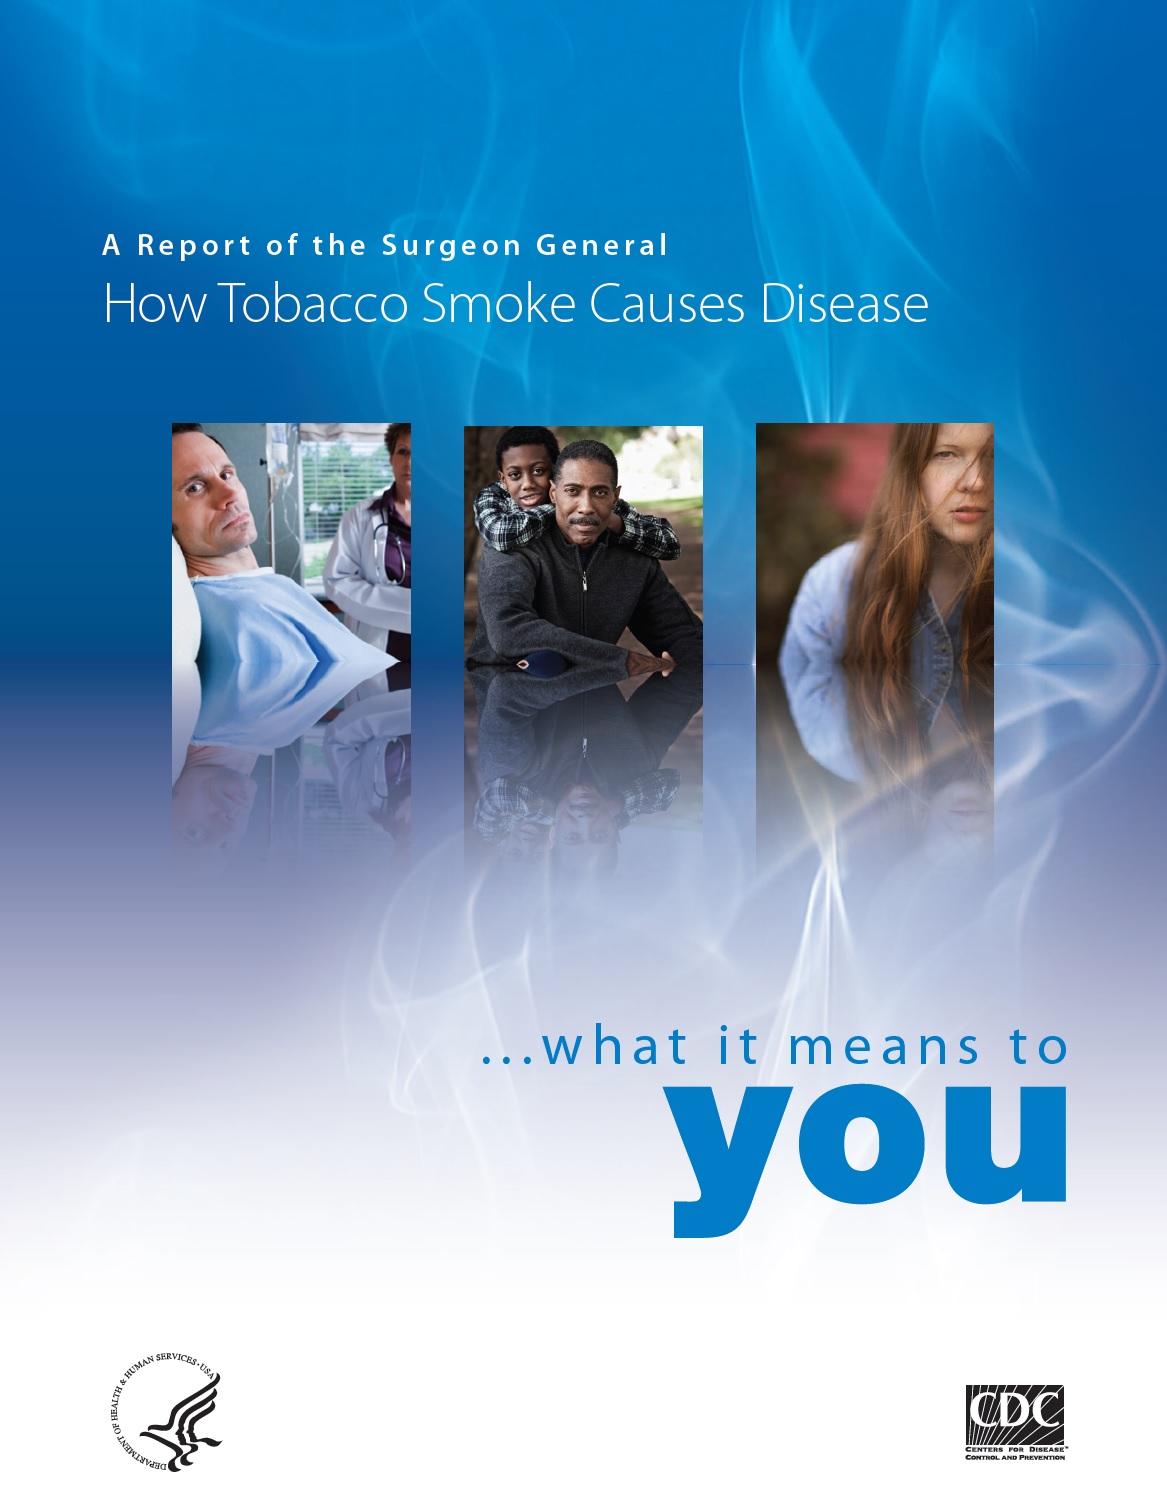 2010 SGR - A Report of the Surgeon General: How Tobacco Smoke Causes Disease: What It Means to You (Consumer Guide)